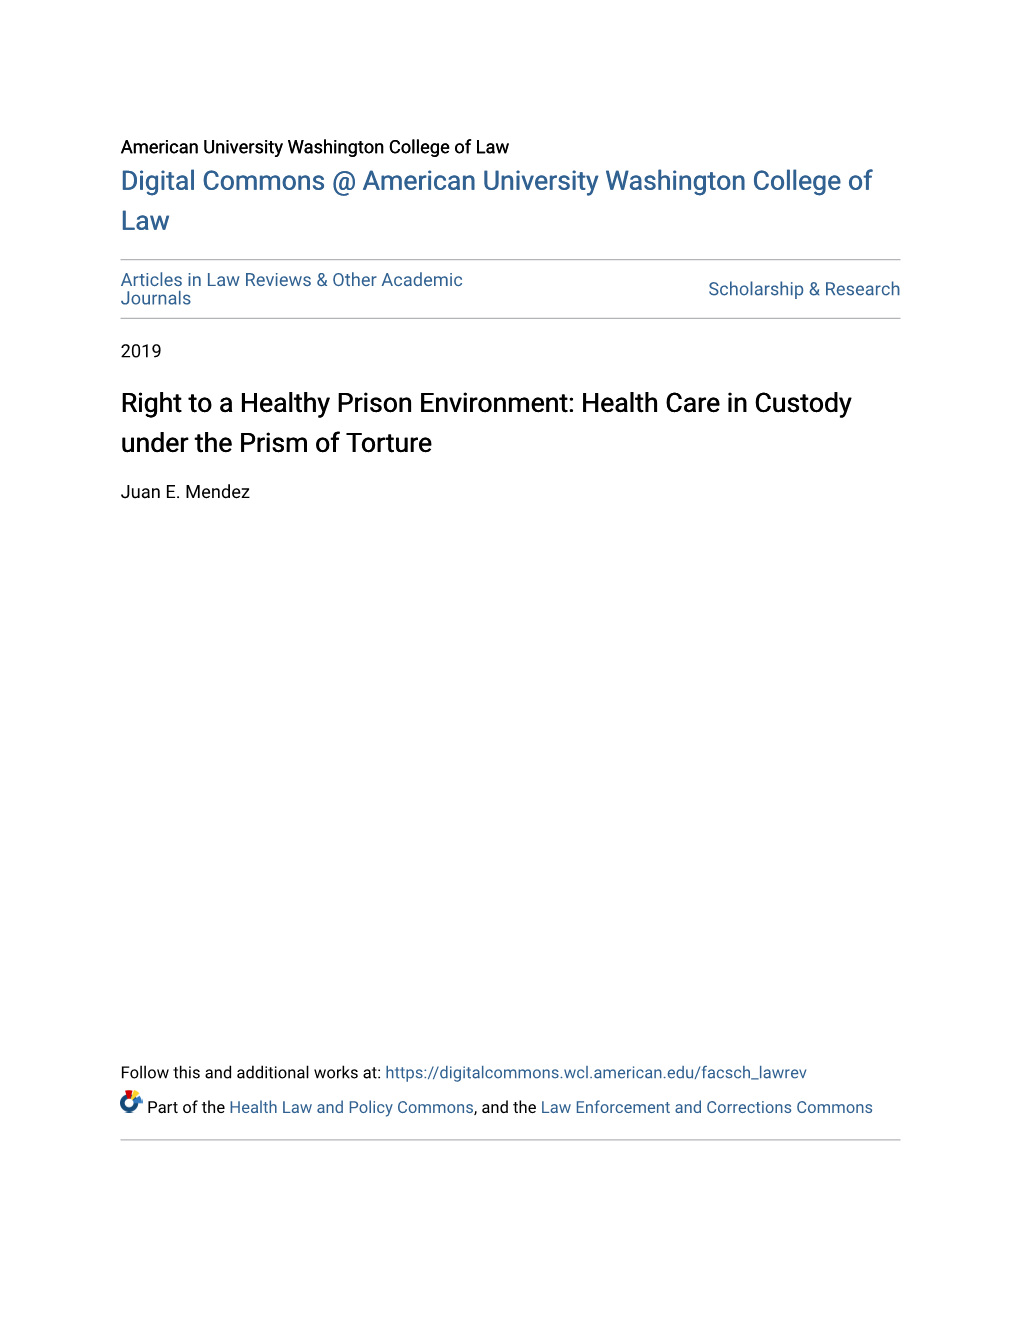 Right to a Healthy Prison Environment: Health Care in Custody Under the Prism of Torture